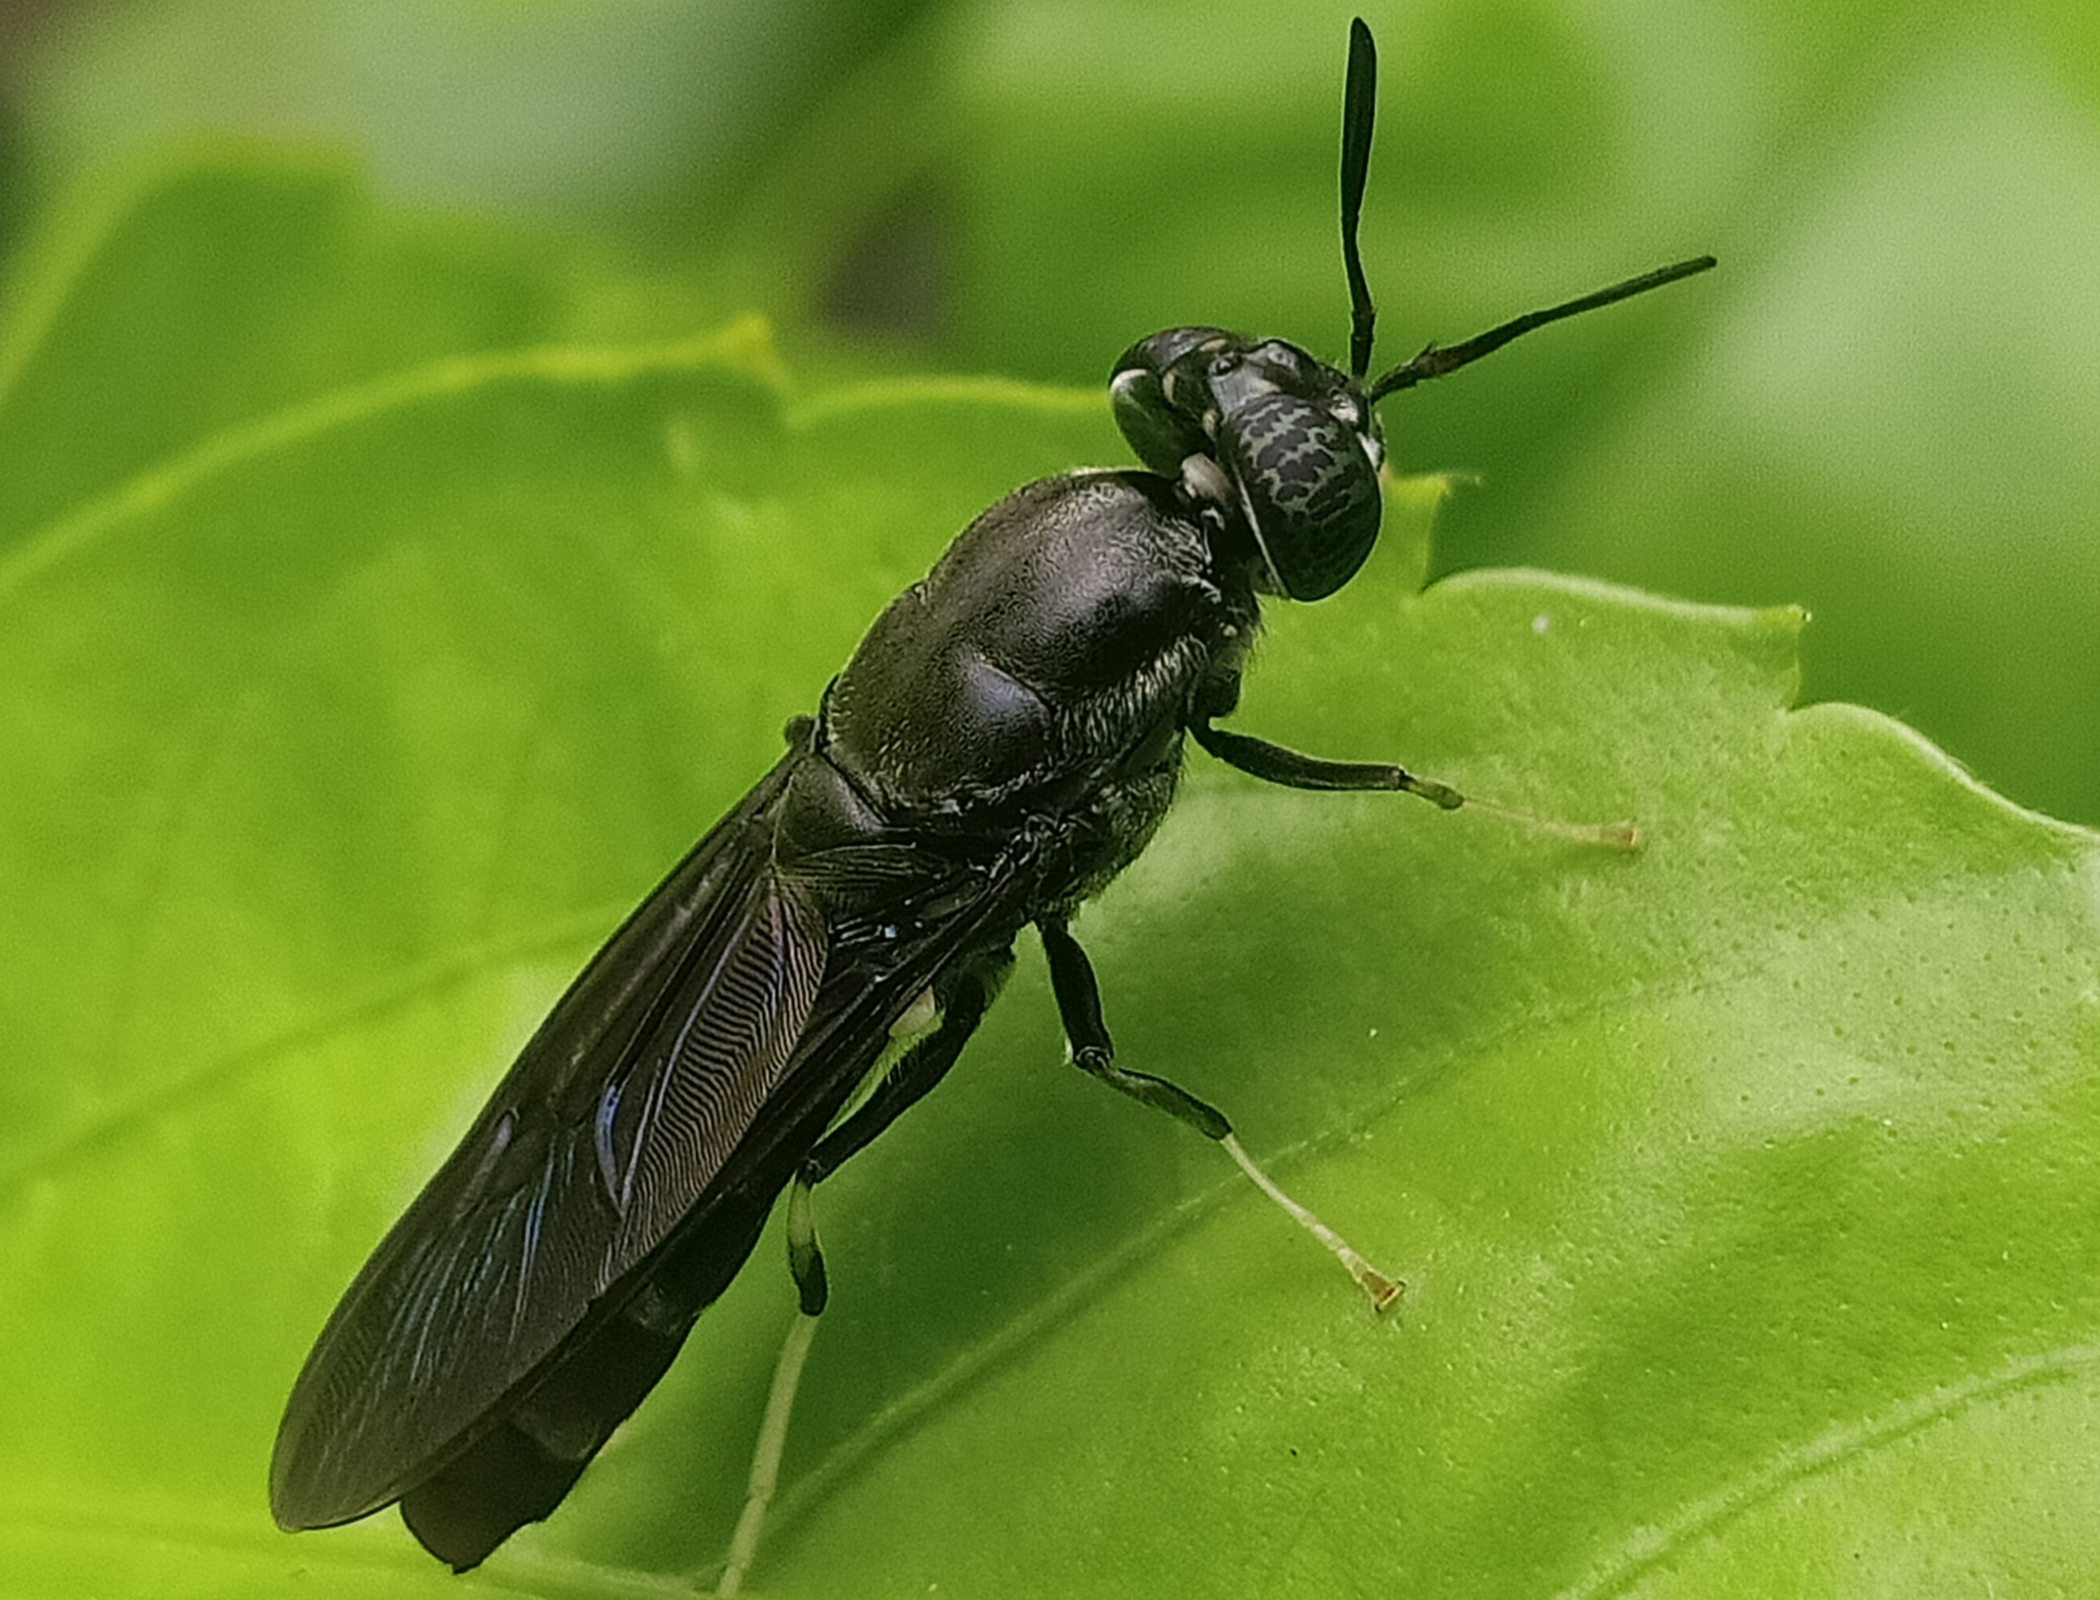 Insects converted into biodegradable plastic with new process